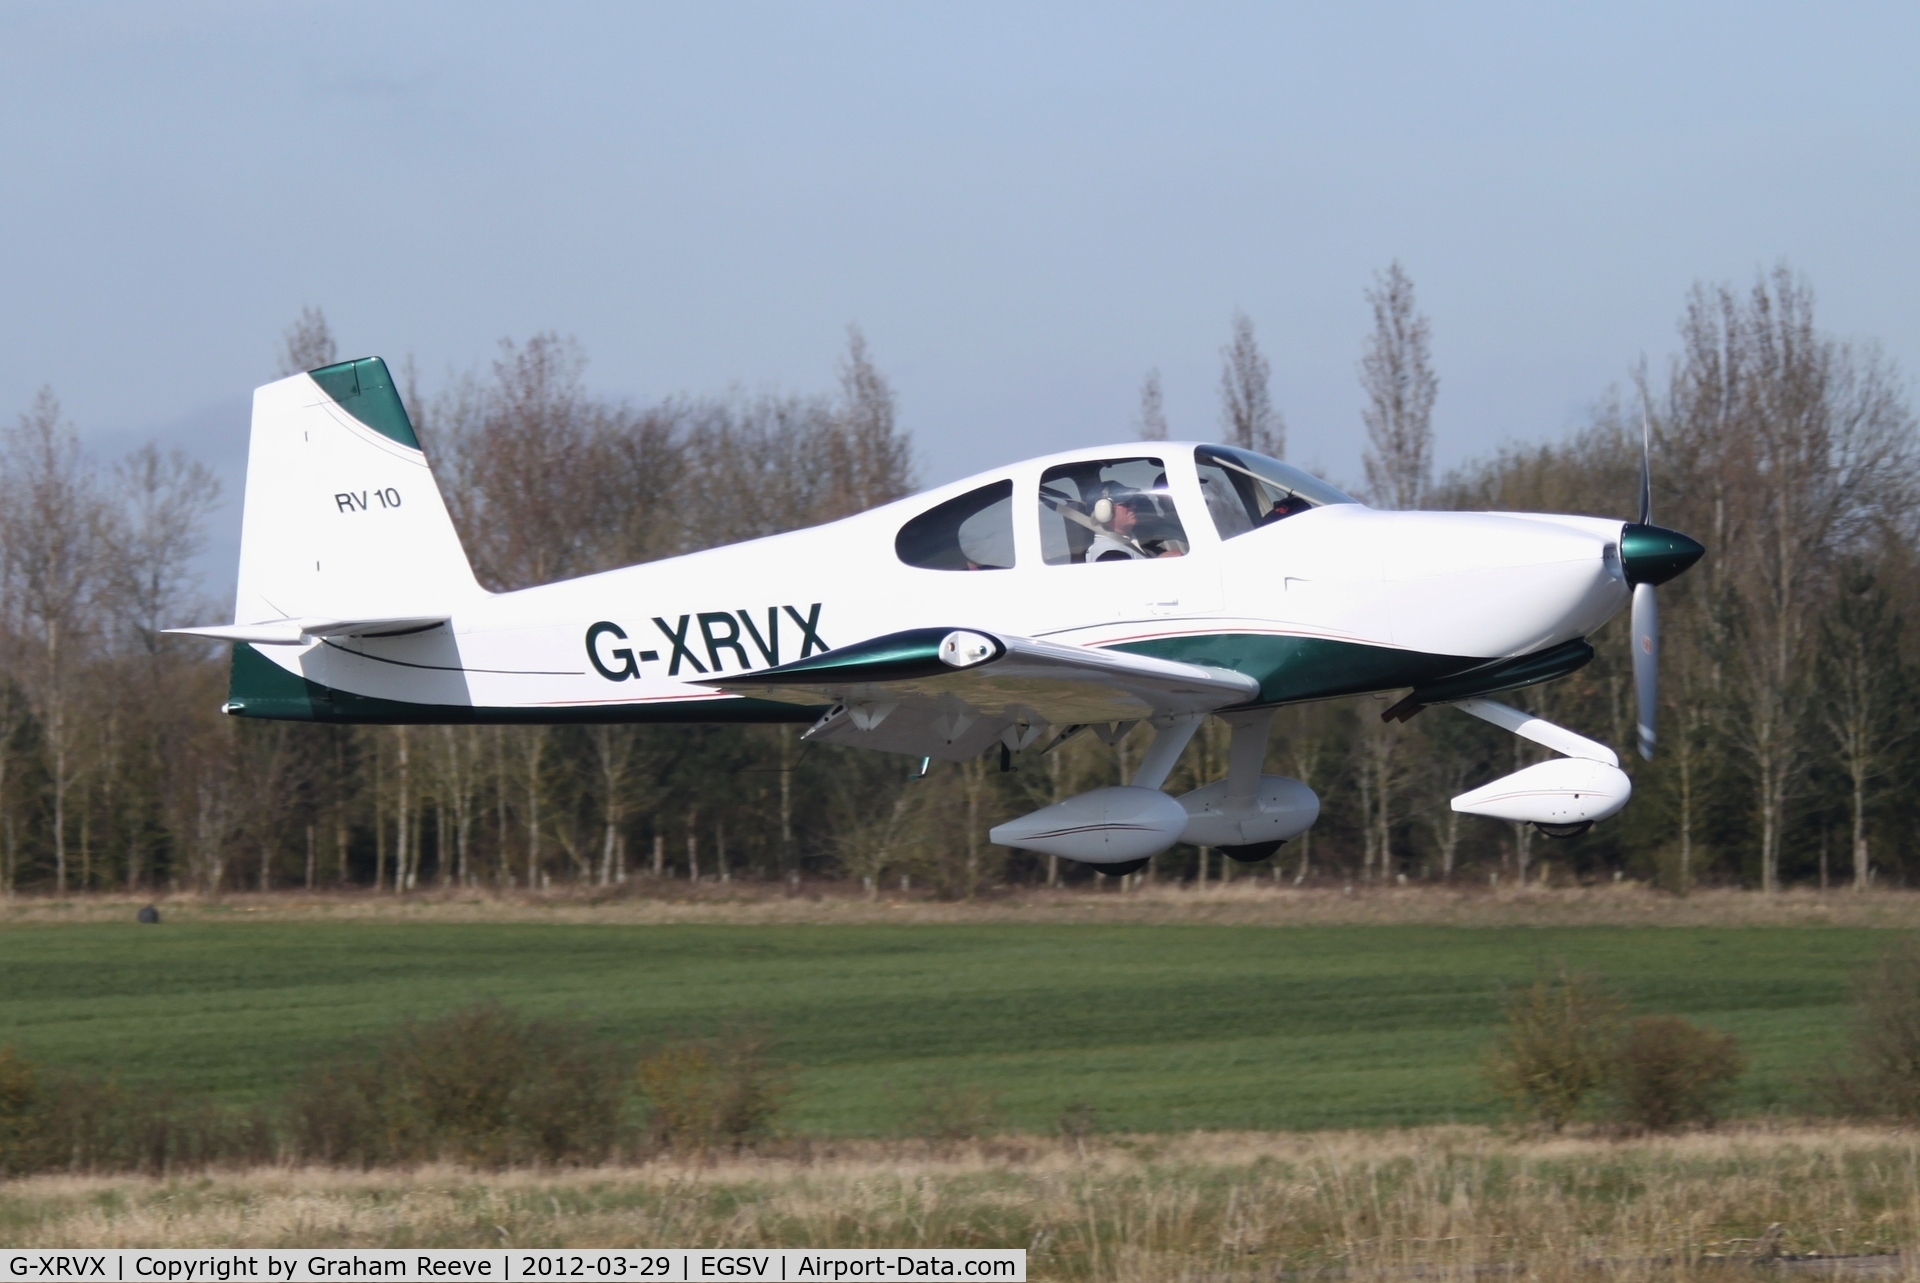 G-XRVX, 2006 Vans RV-10 C/N PFA 339-14592, About to touch down.